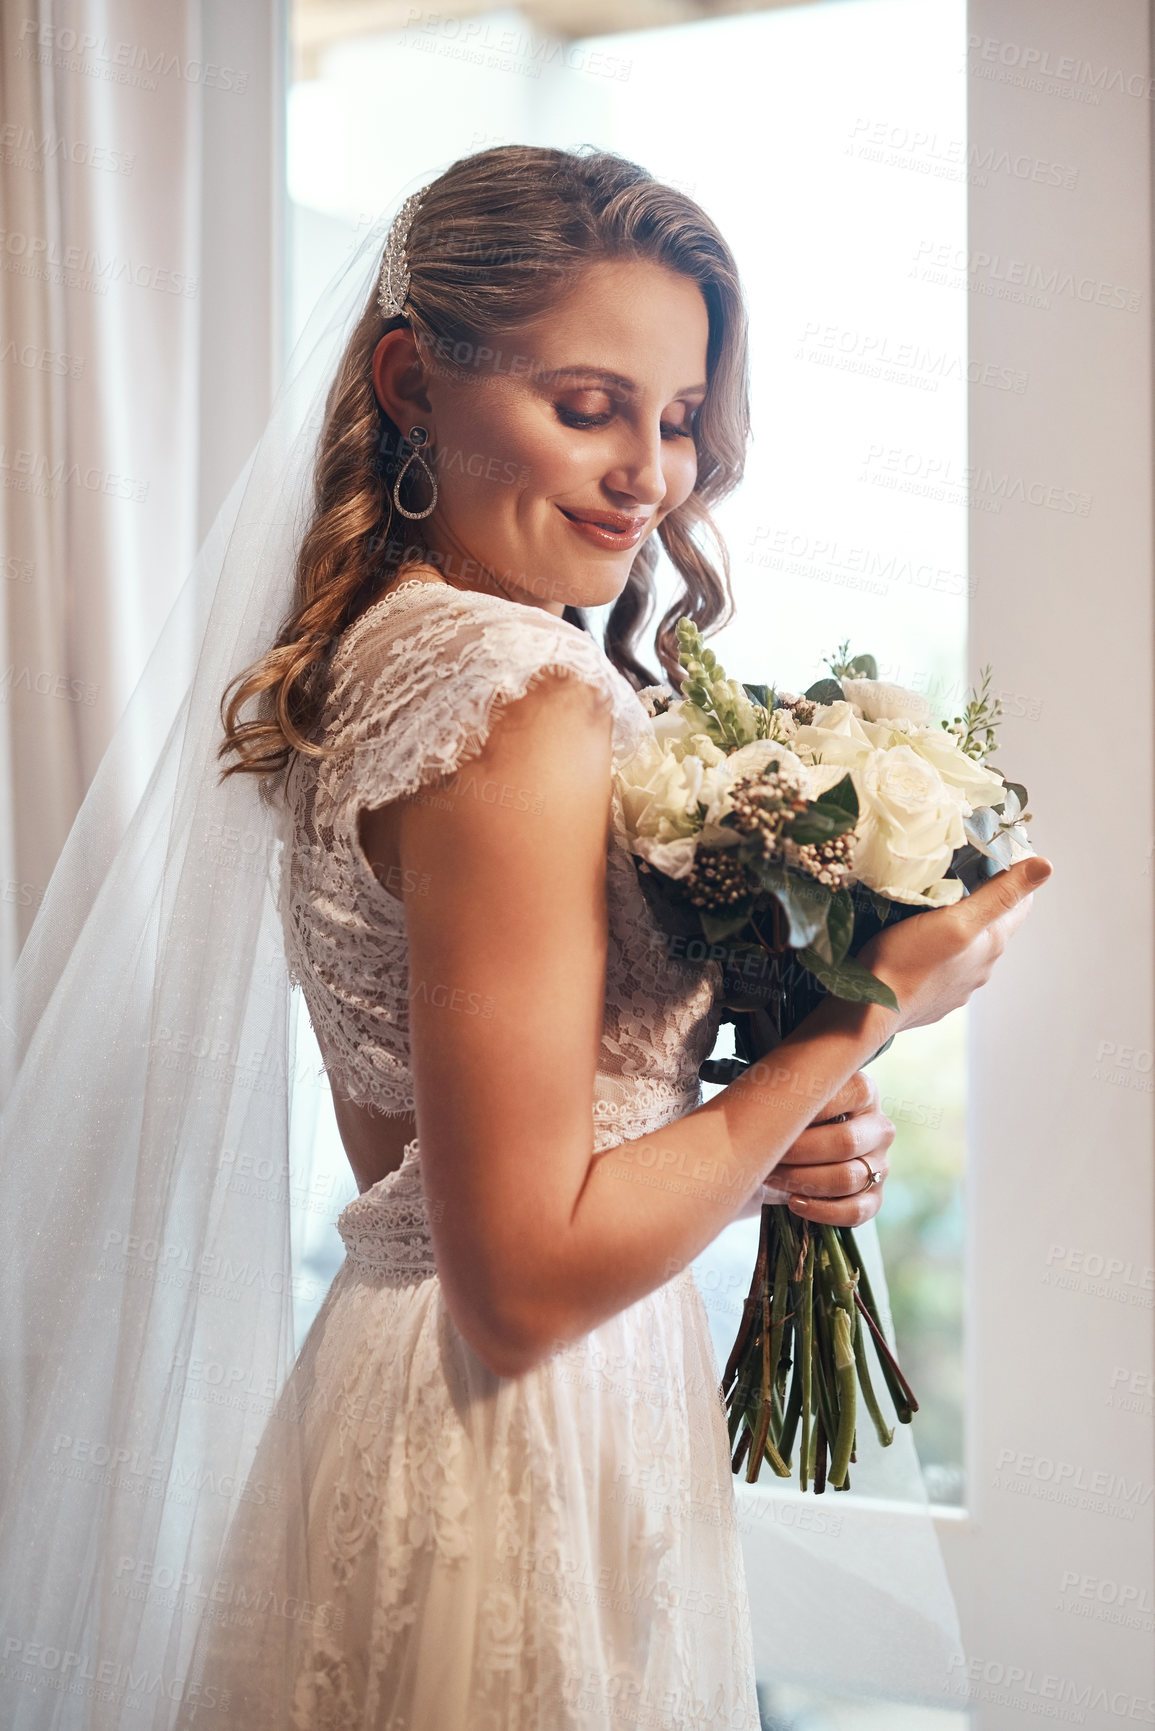 Buy stock photo Cropped shot of an attractive young bride standing alone in the dressing room and holding her bouquet of flowers